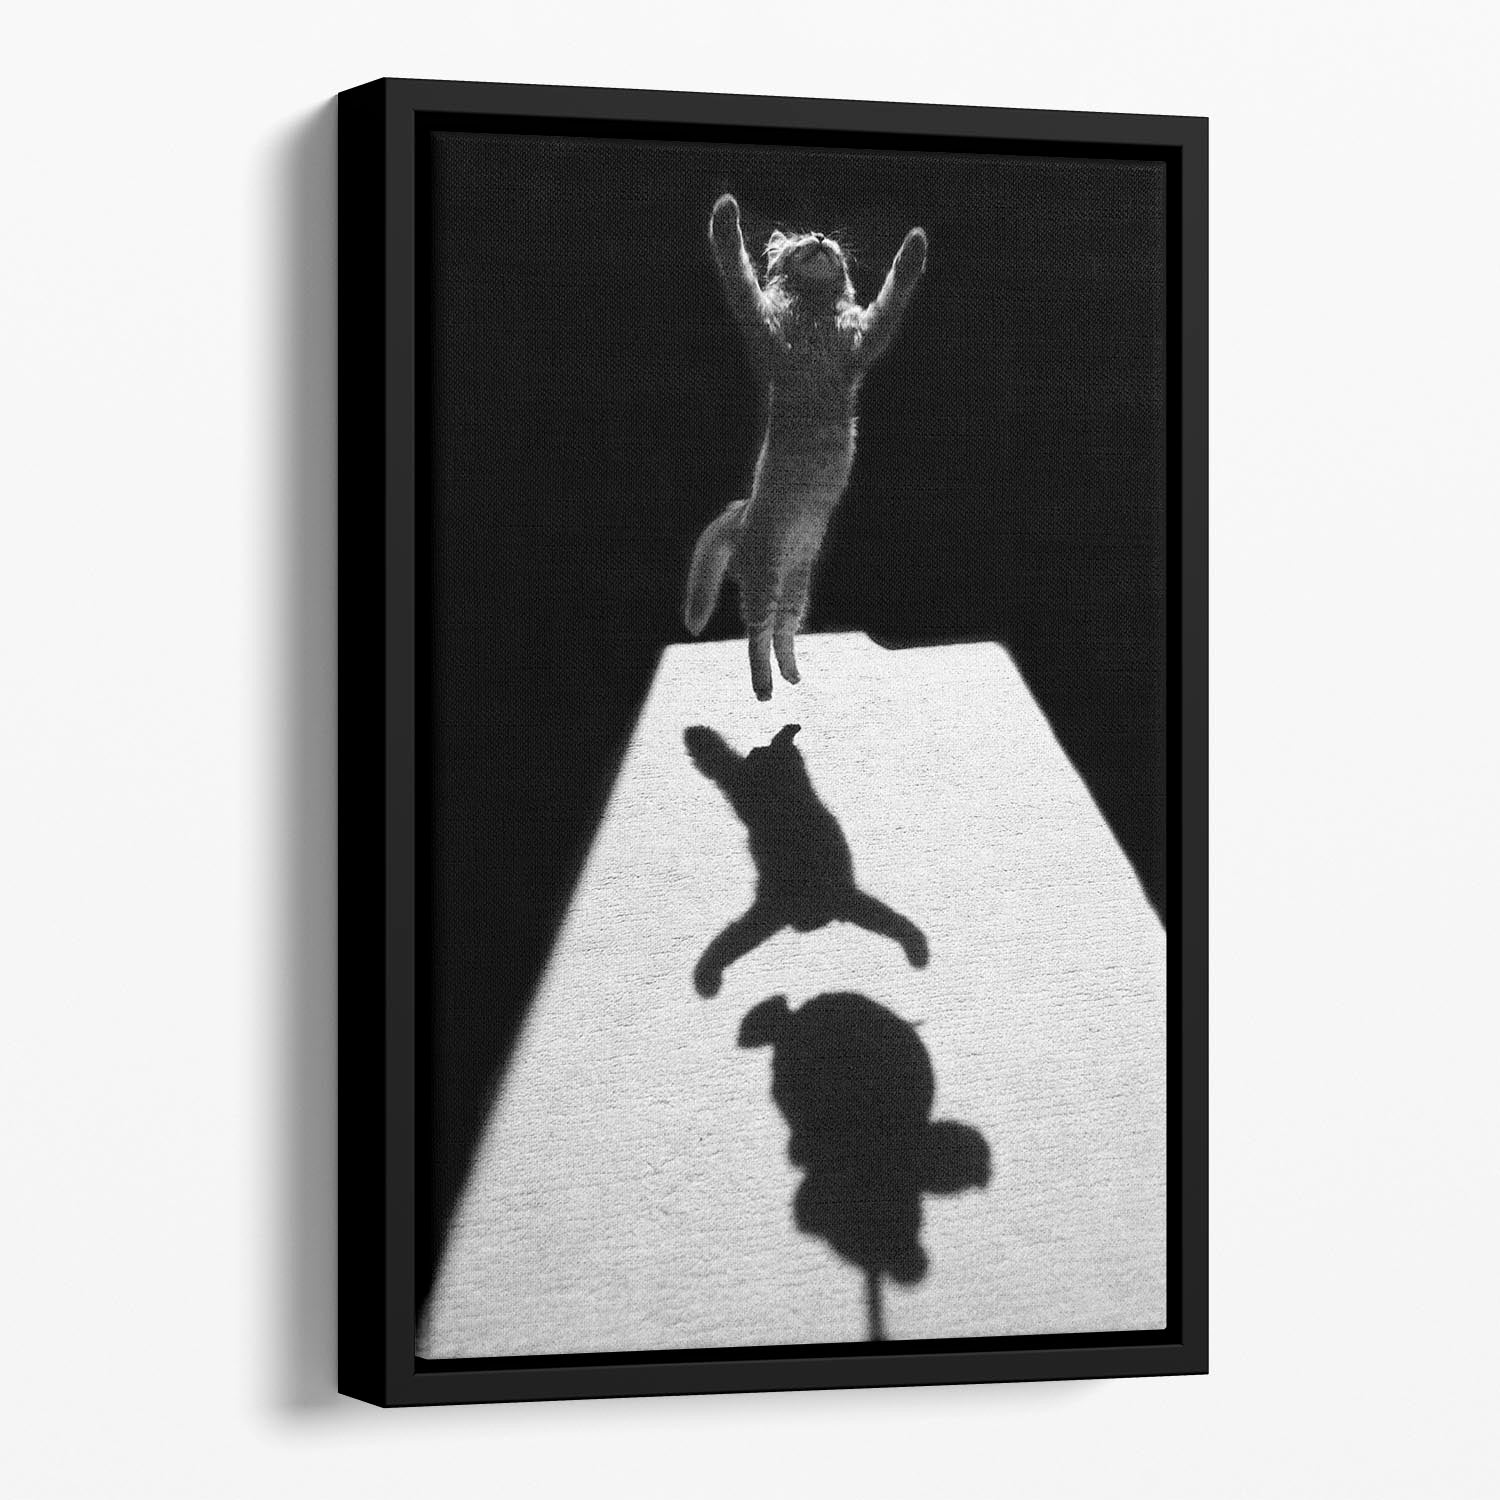 Edgar the great Floating Framed Canvas - 1x - 1